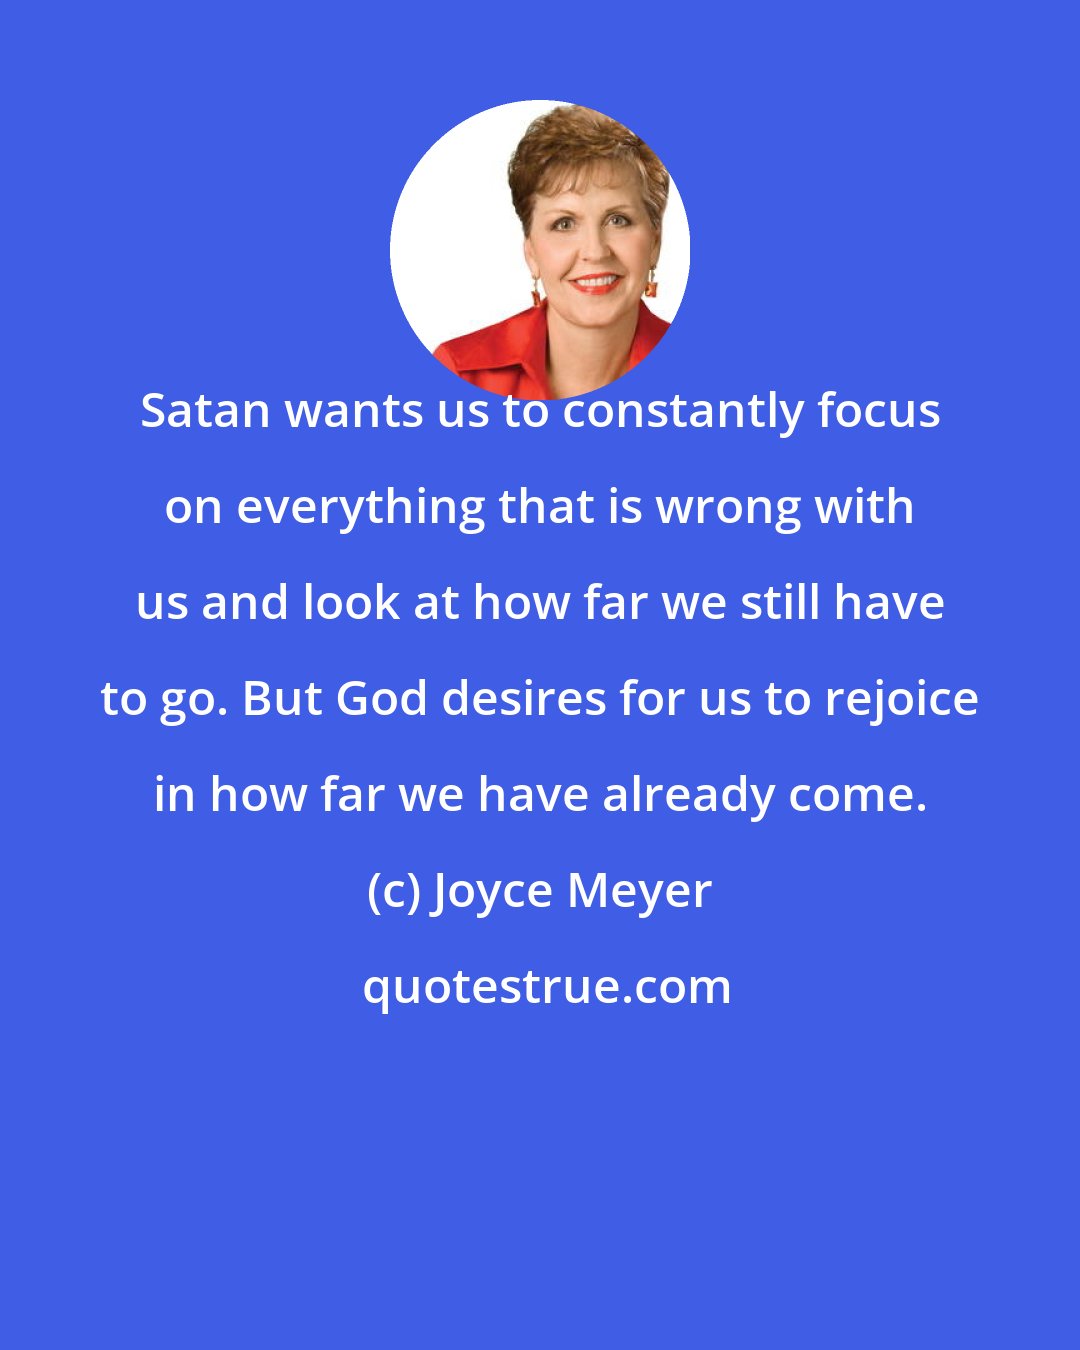 Joyce Meyer: Satan wants us to constantly focus on everything that is wrong with us and look at how far we still have to go. But God desires for us to rejoice in how far we have already come.